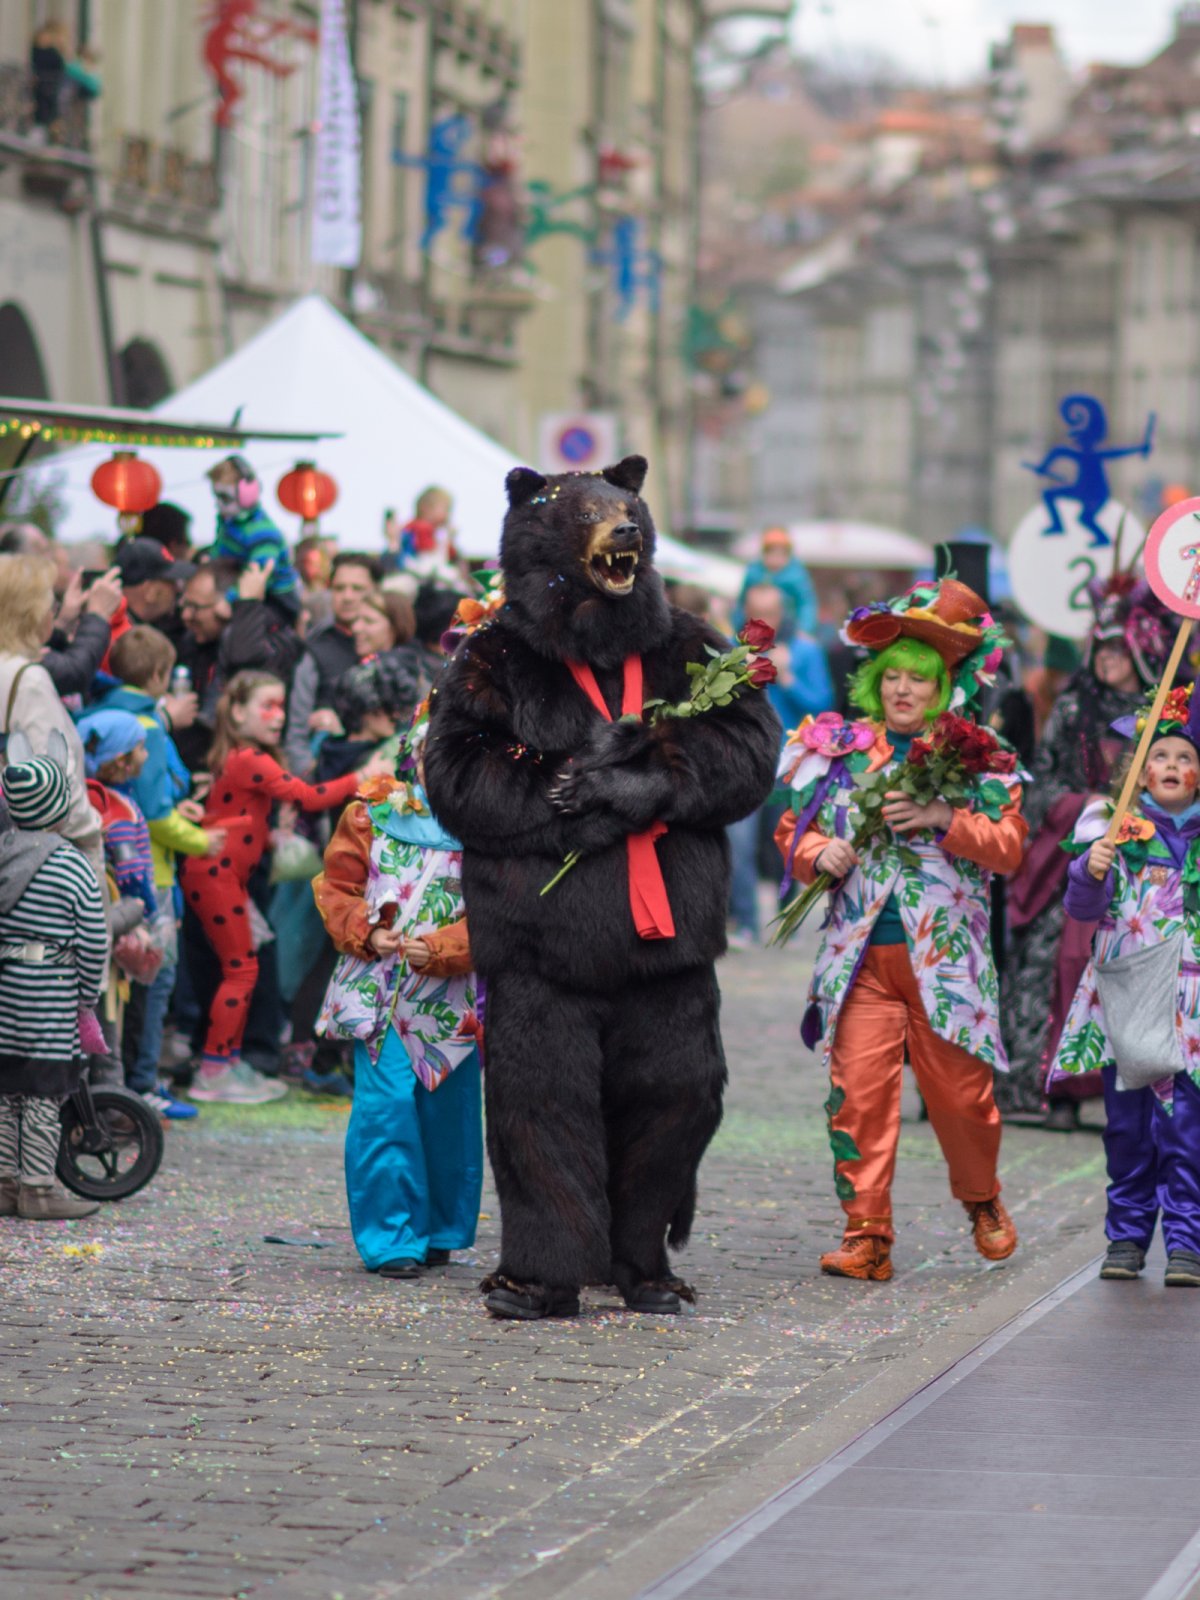 Costumes at Swiss carnivals: The iconic bear at the Bern carnival